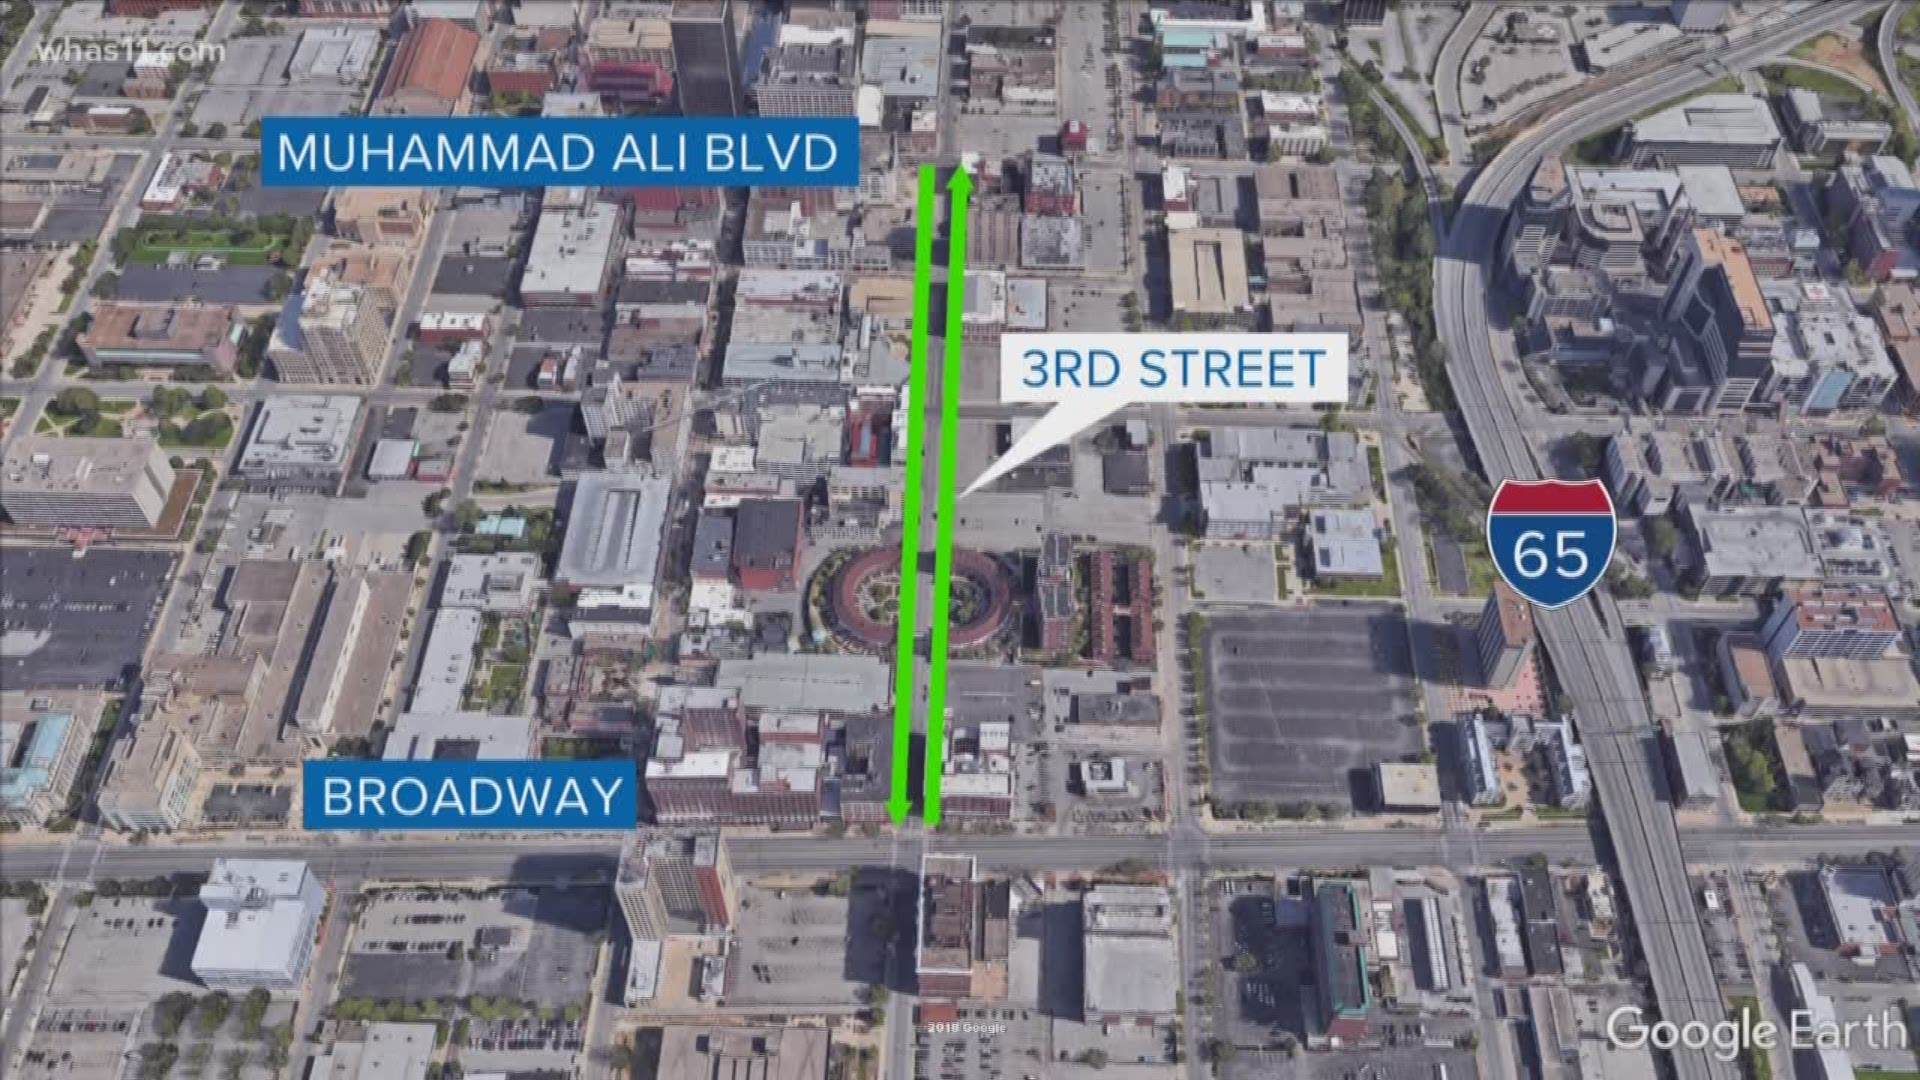 Metro Public Works has announced Third Street between Broadway and Muhammad Ali Boulevard will be converted to two-way traffic.